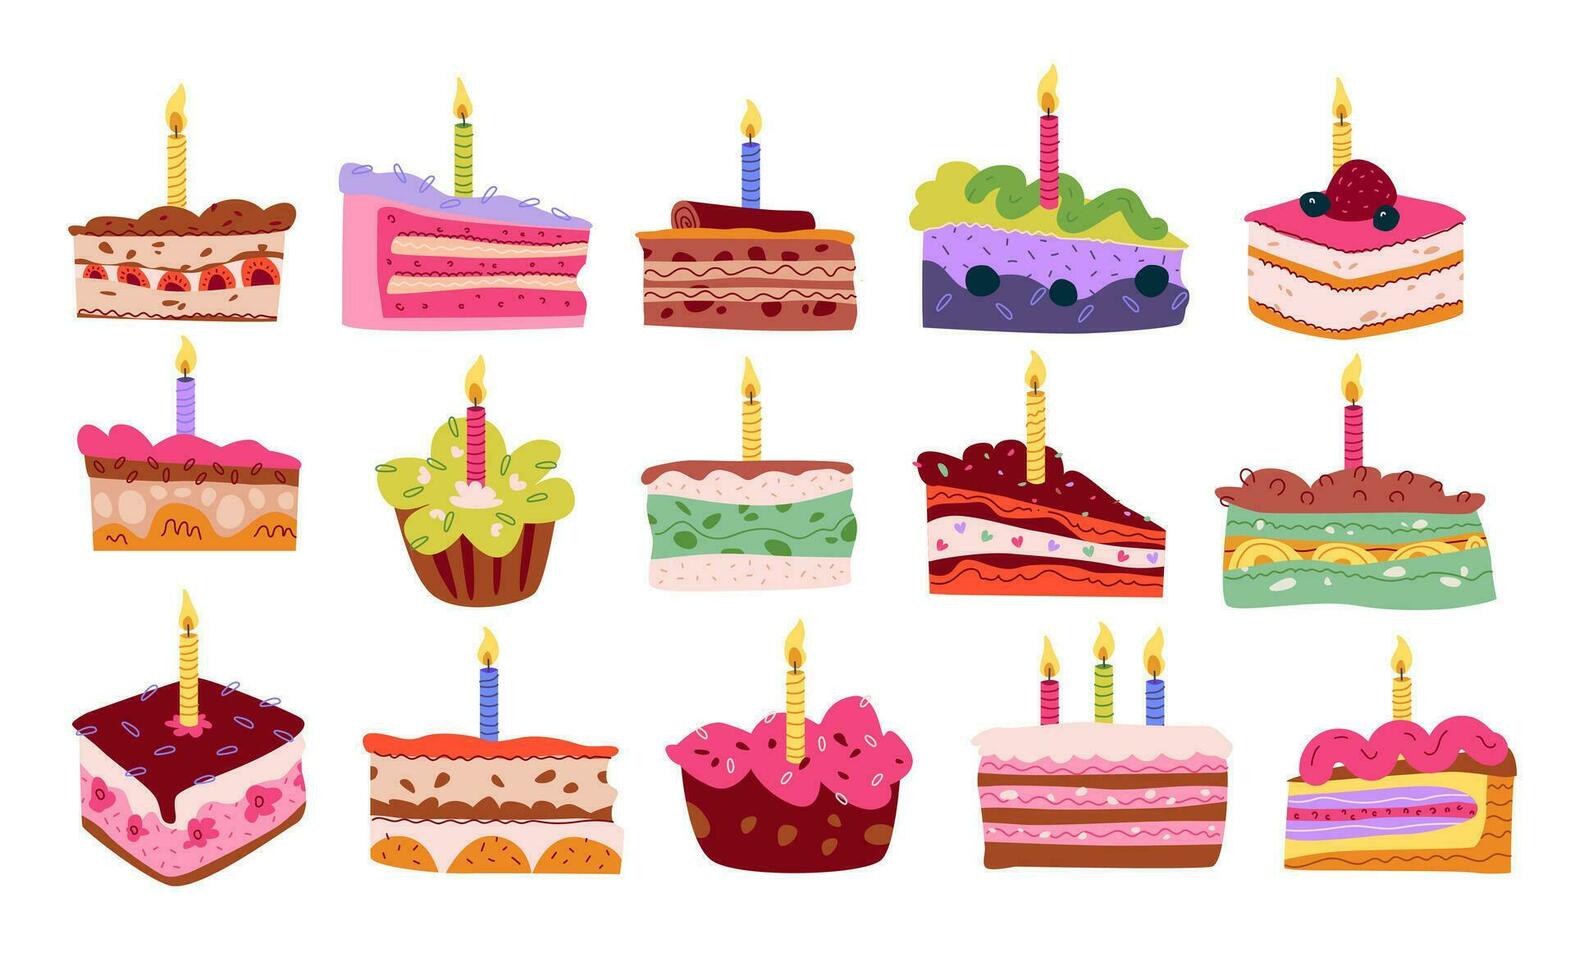 Pieces of a festive cake with candles. Birthday cake. Hand-drawn vector illustration.